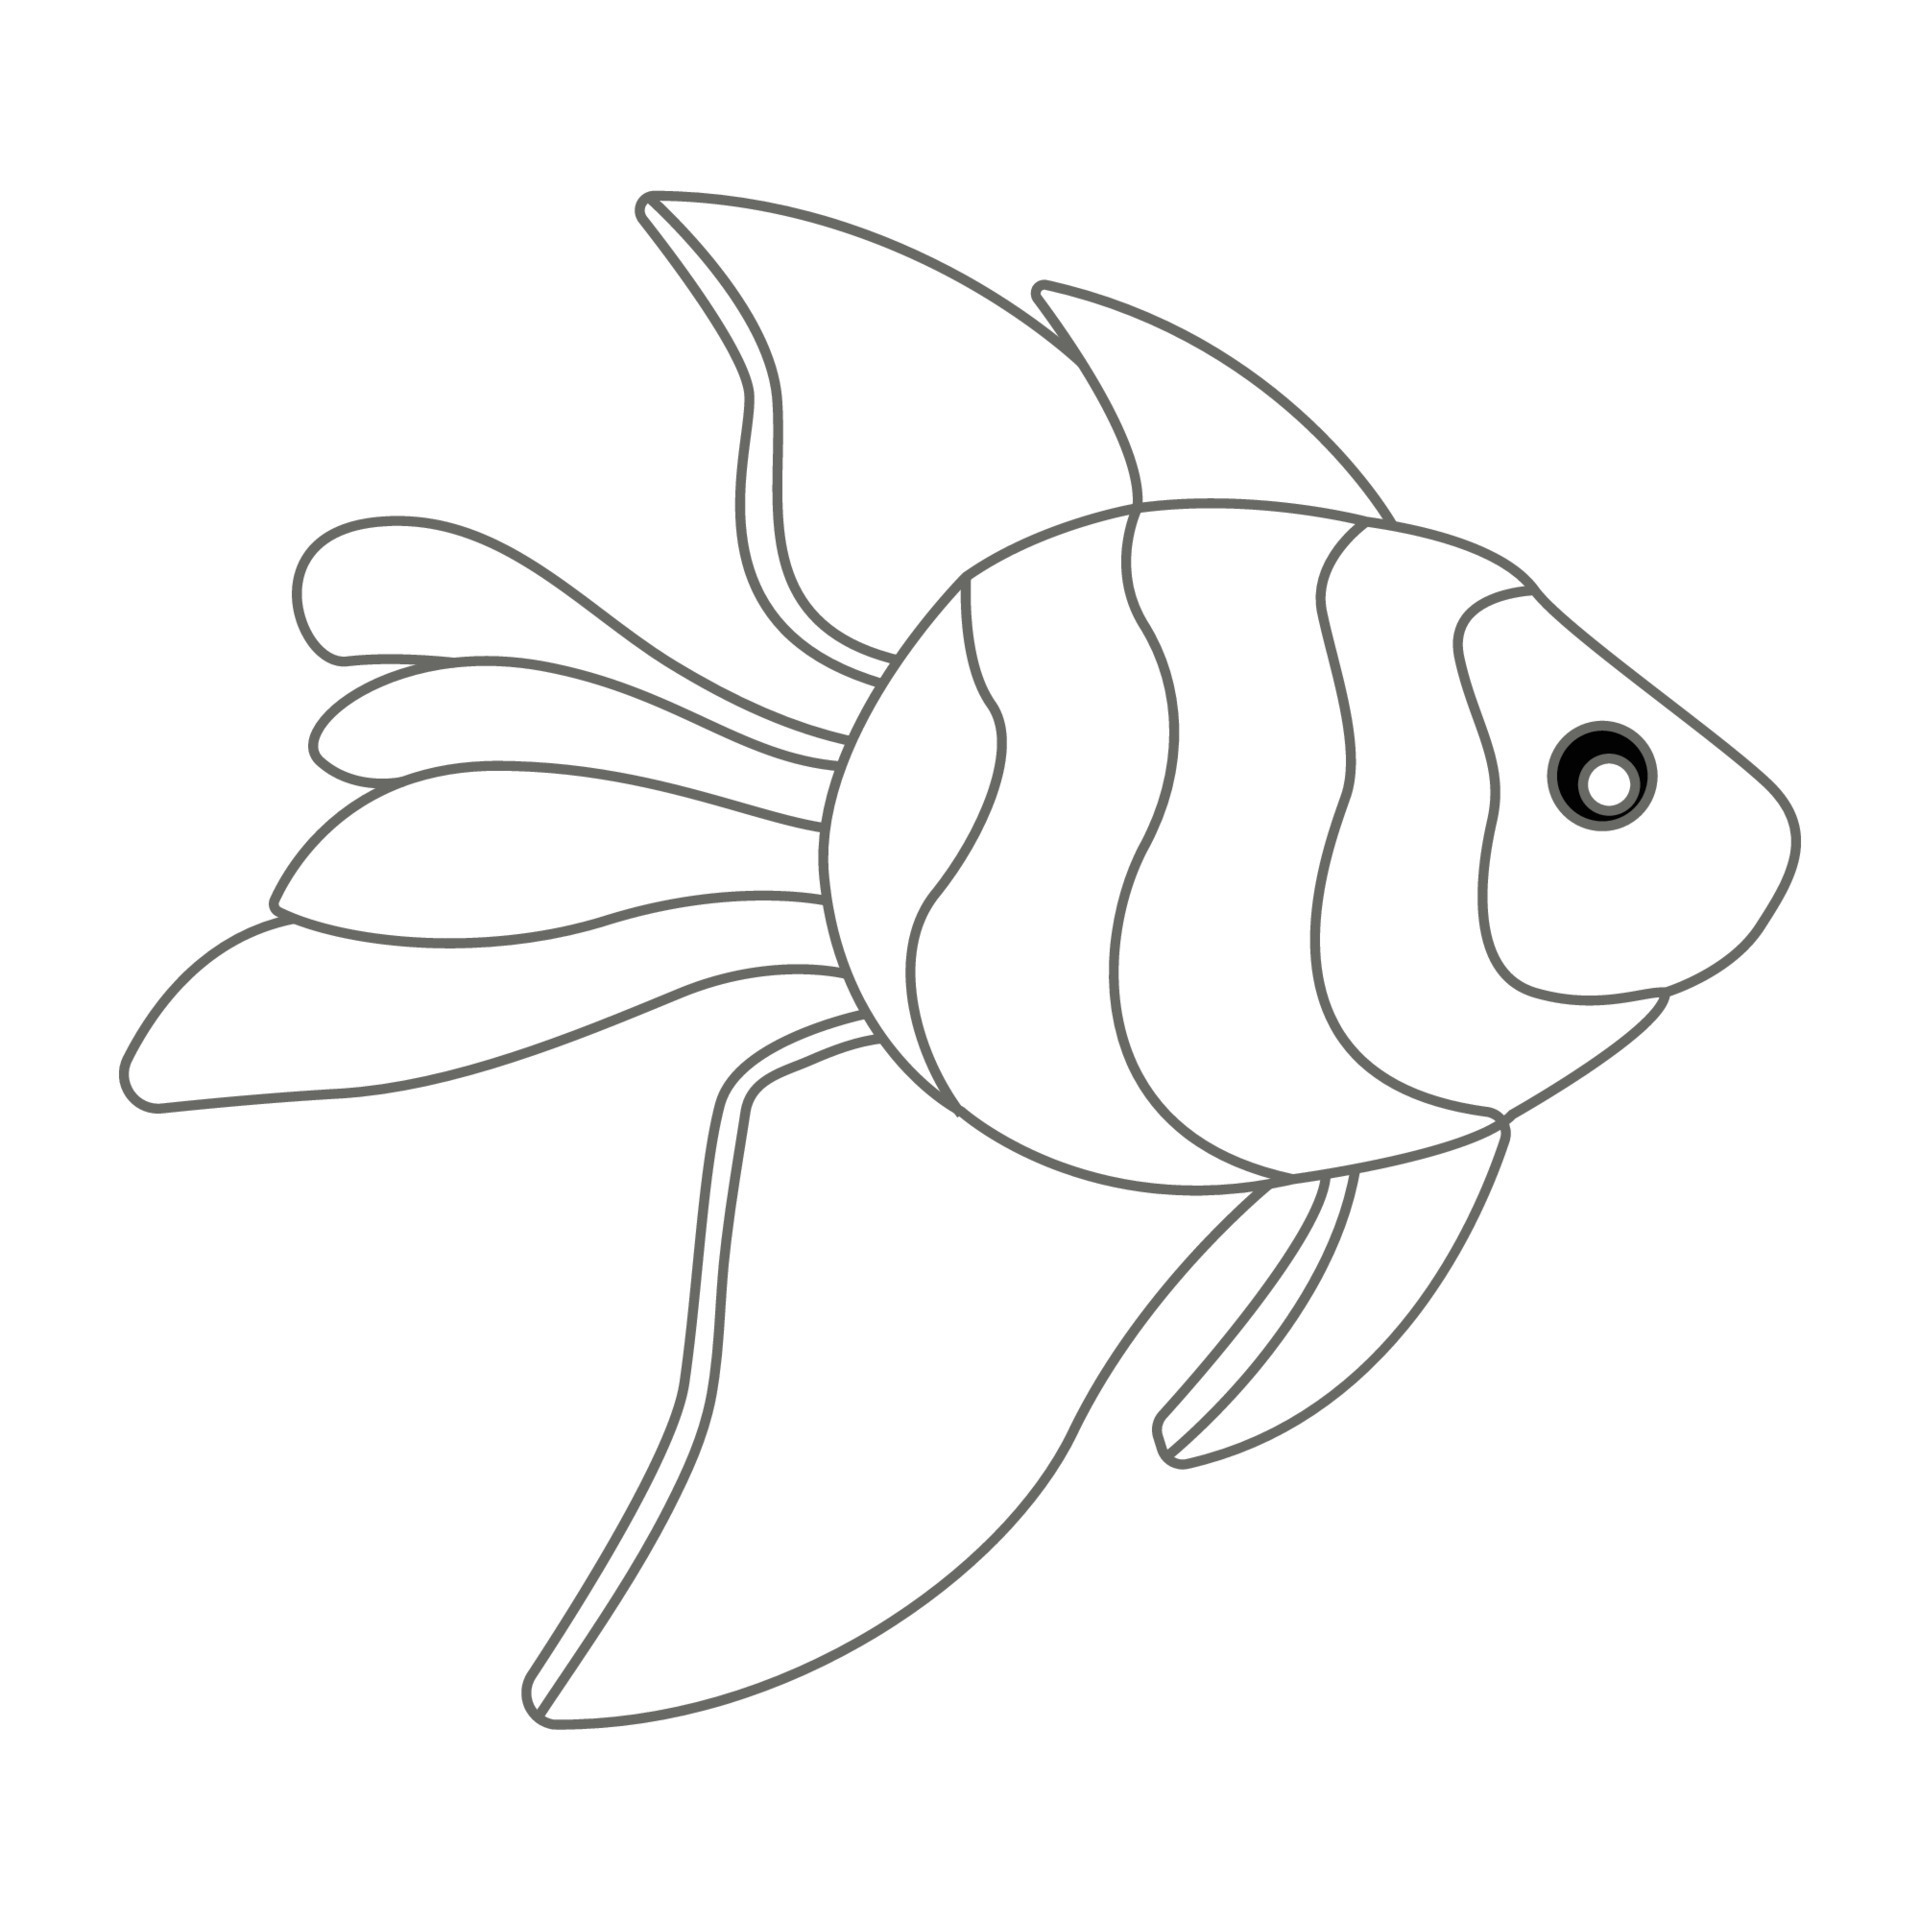 Fish Coloring Page Under Water With Bubbles 20 Vector Art at ...